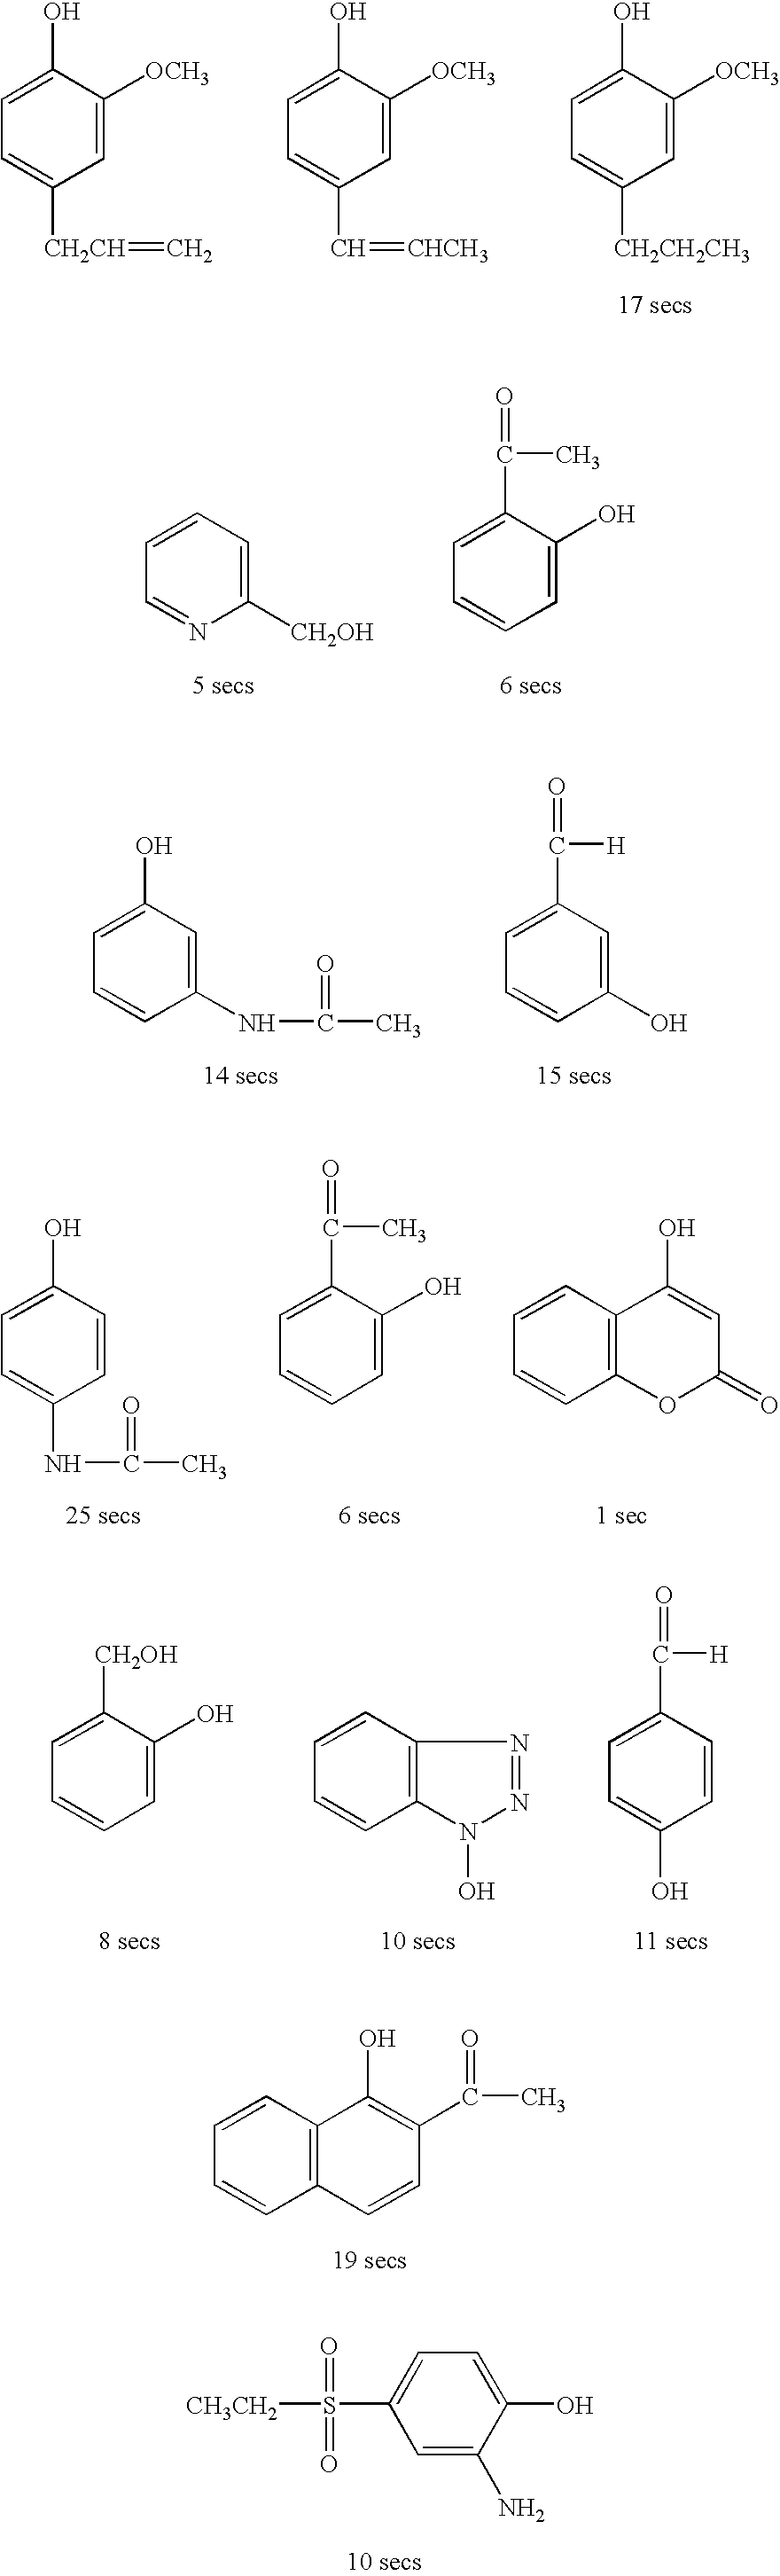 Method of fluxing using a fluxing composition containing compounds with an aromatic ring and no imino group